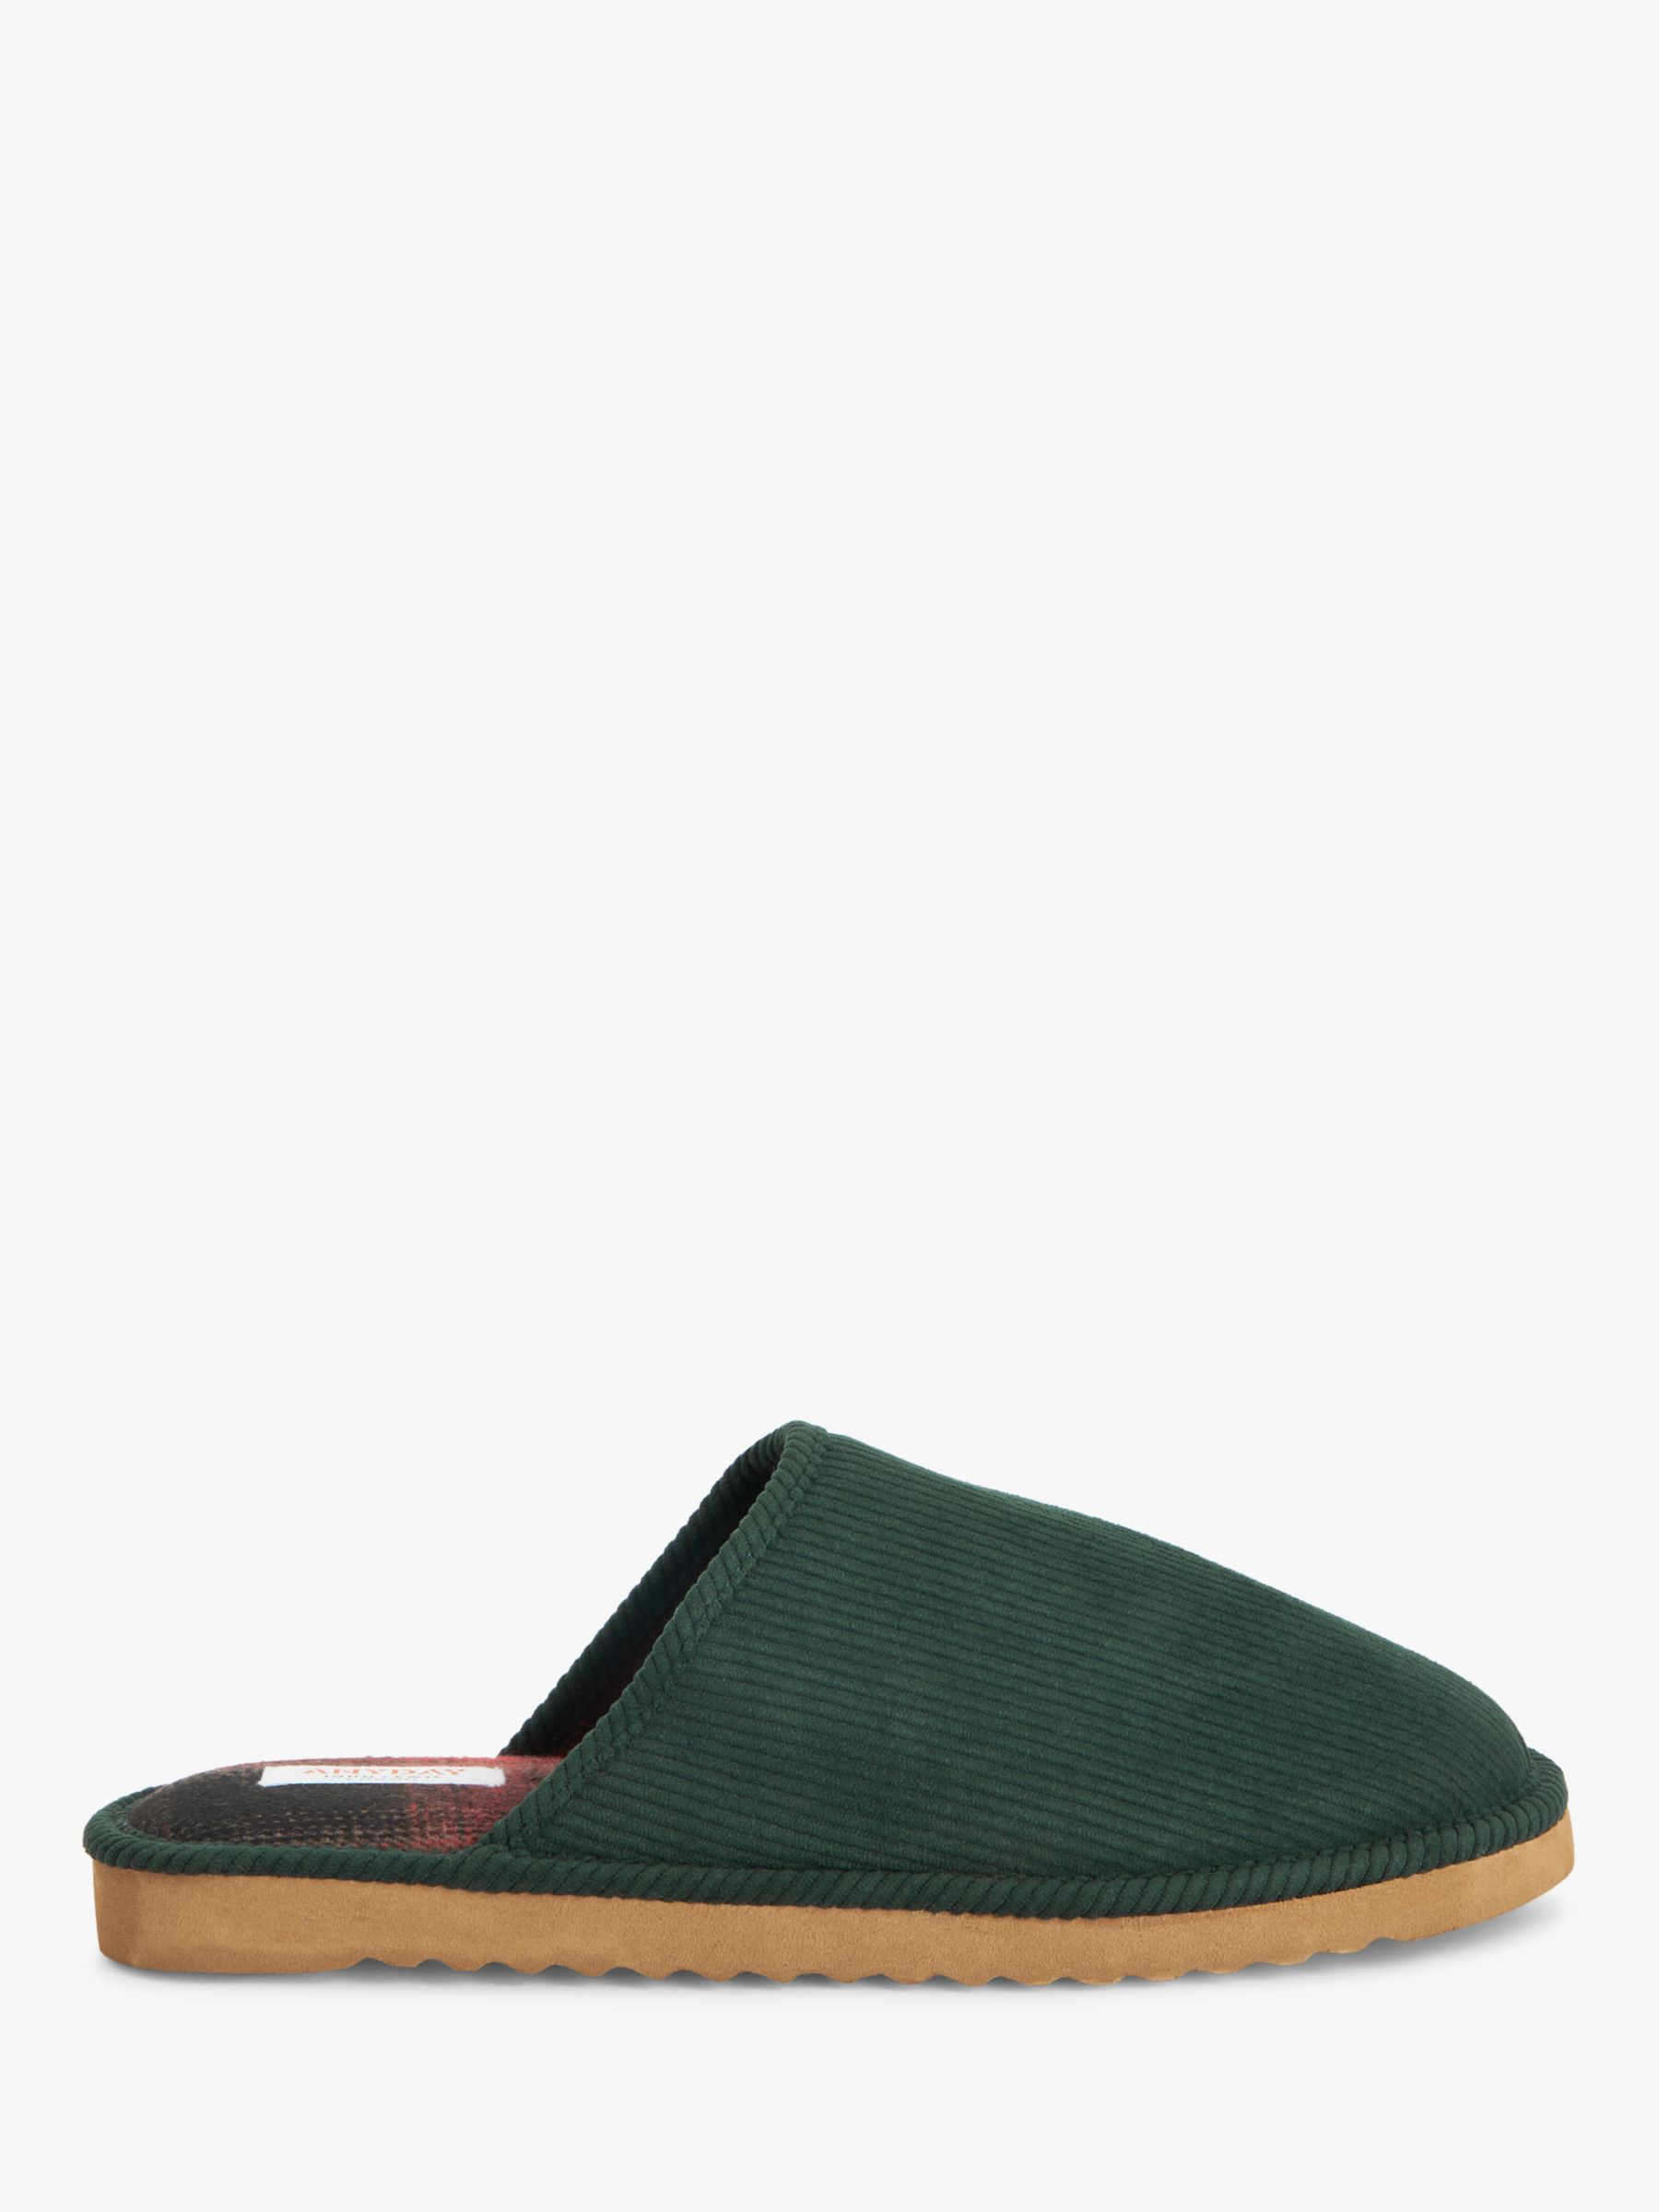 John Lewis ANYDAY Cord Wedge Mule Slippers, Green at John Lewis & Partners